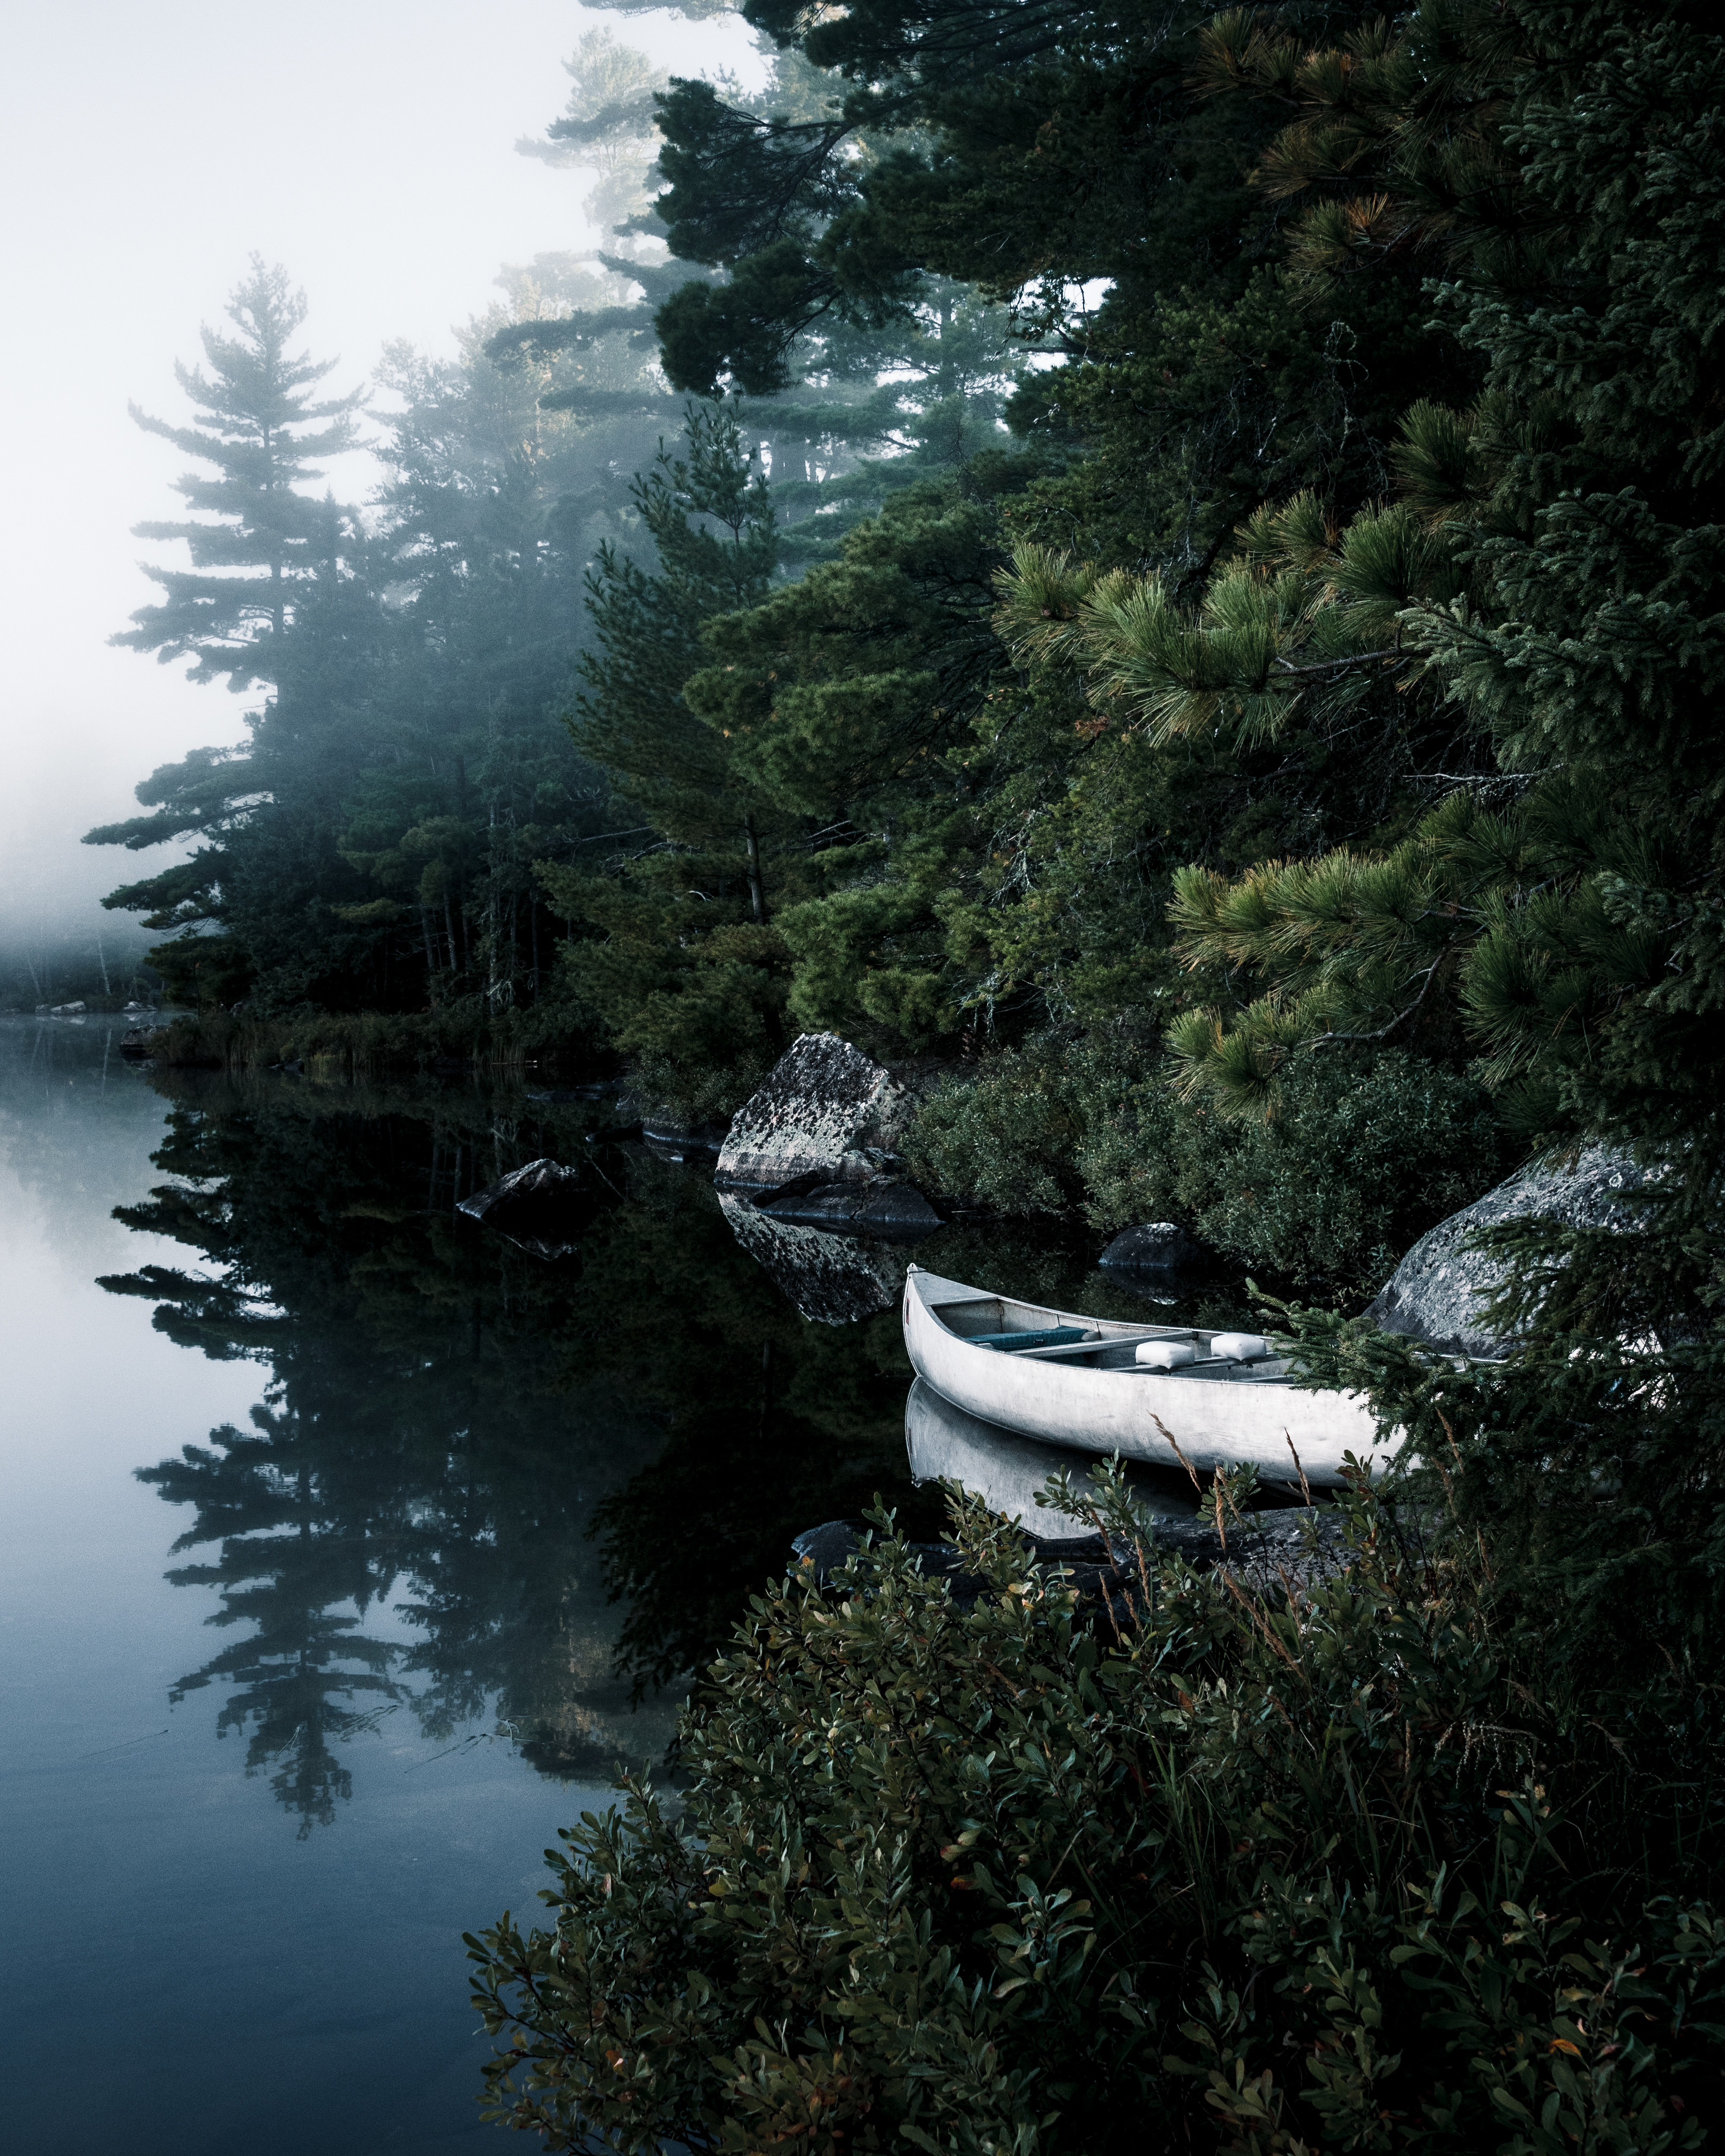 branches, nature, trees, lake, spruce, fir, boat